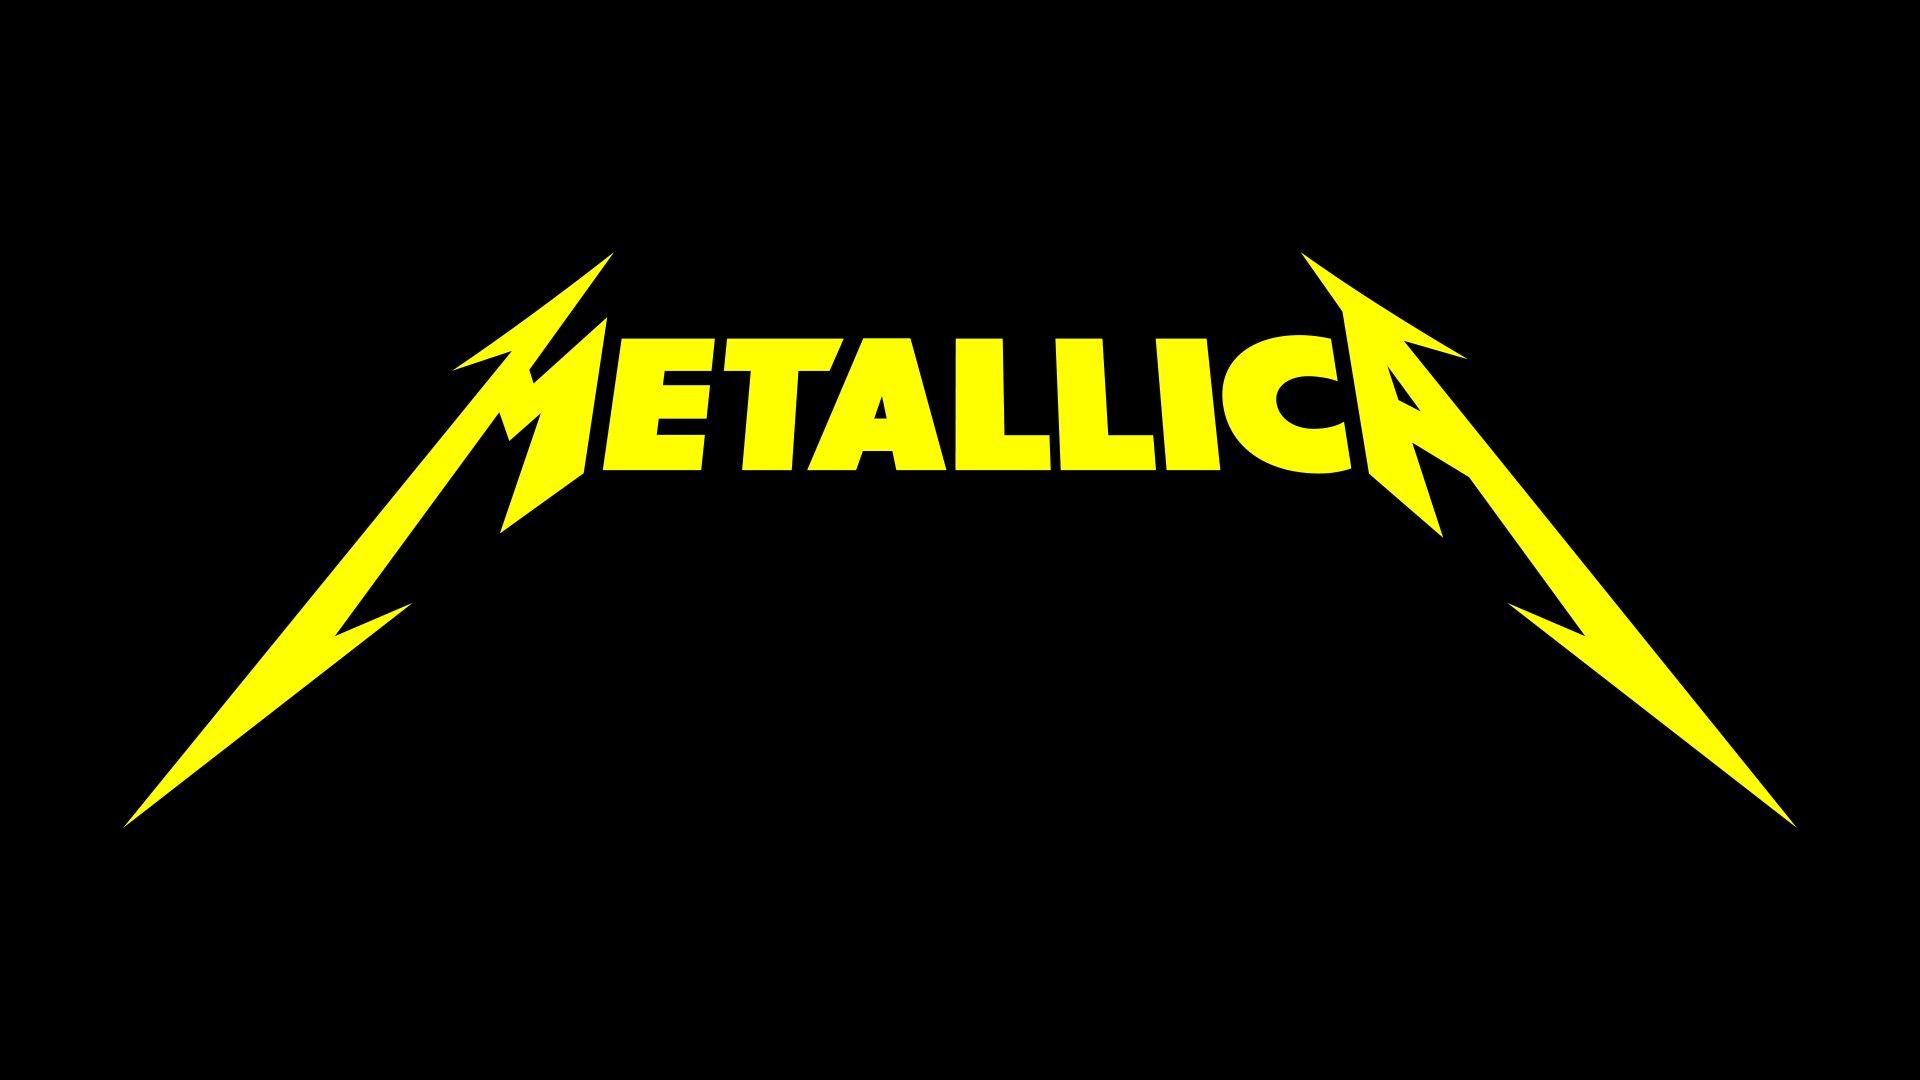 2023-03-29 Far Out Magazine: Metallica release teaser of new single from forthcoming album ‘72 Seasons’